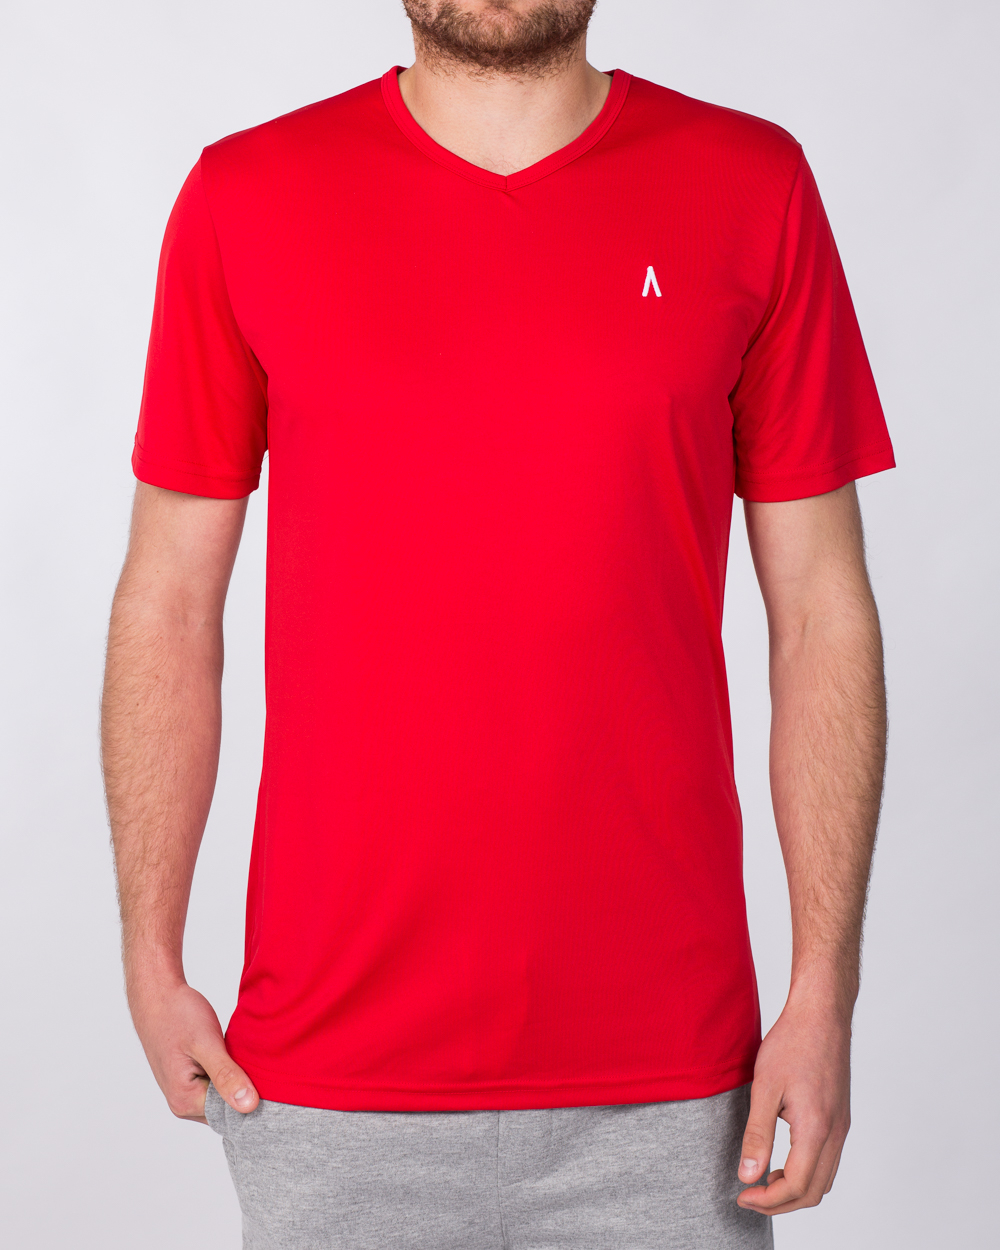 2t V-Neck Training Top (red)